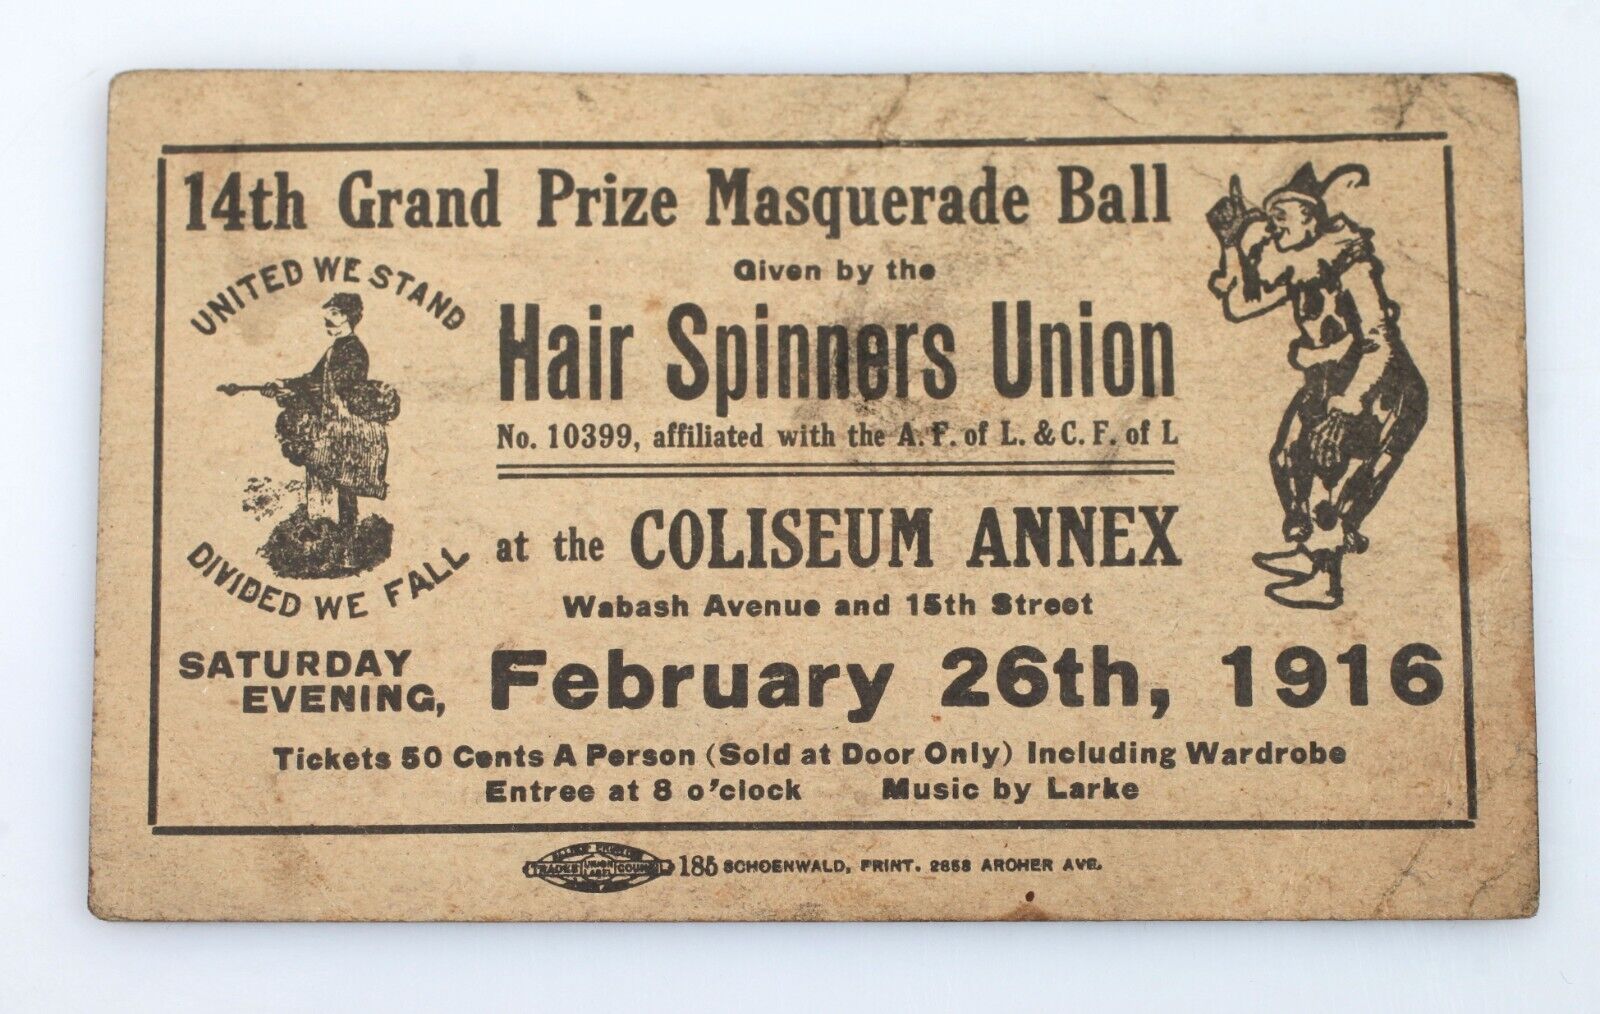 Vintage Chicago Dance Ad Card 1916 Hair Spinners Union Masquerade Ball Coliseum